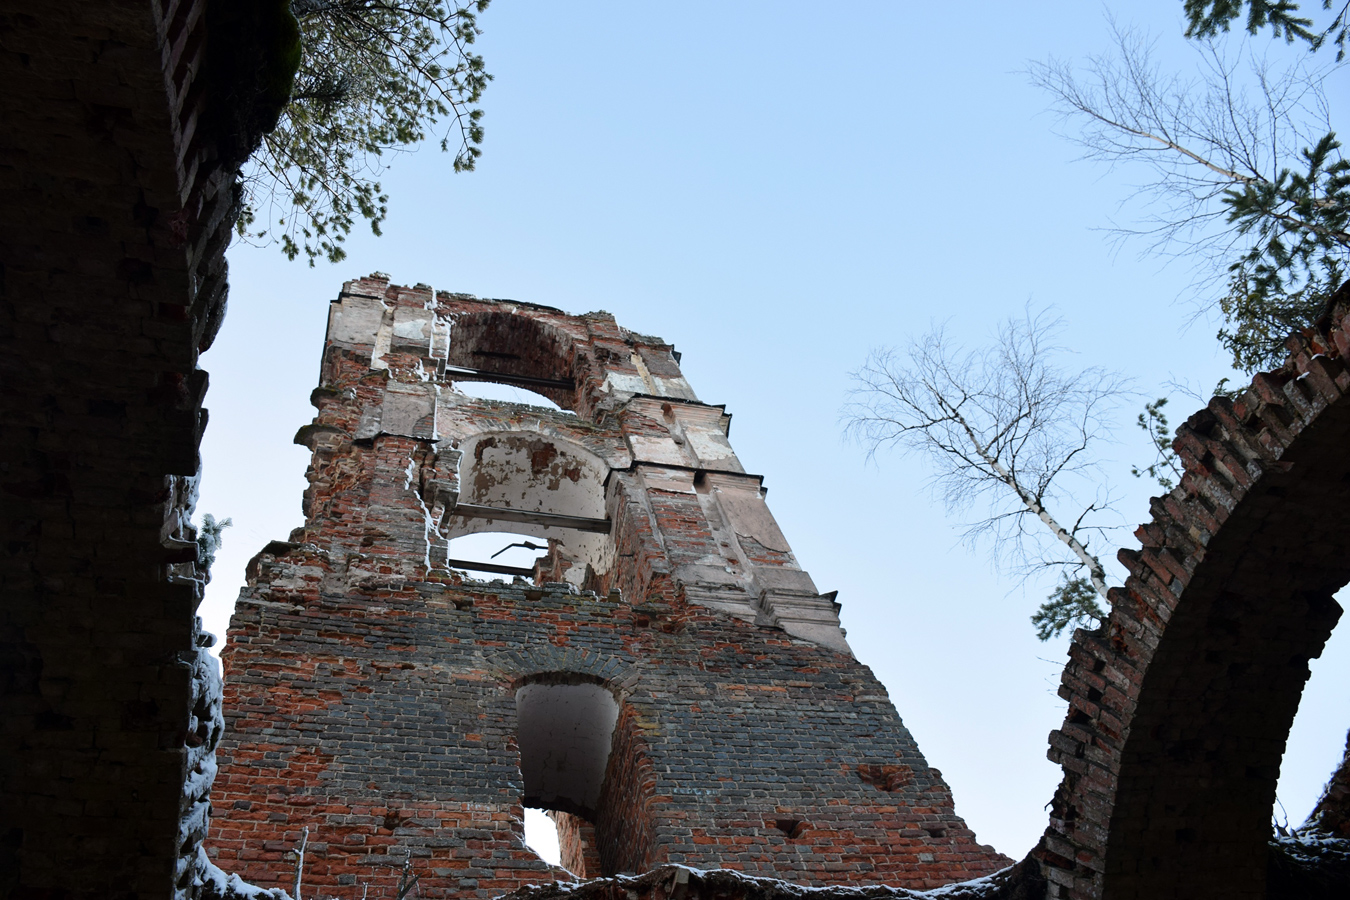 October 28, 2019. Tulema. Ruins of the orthodox church